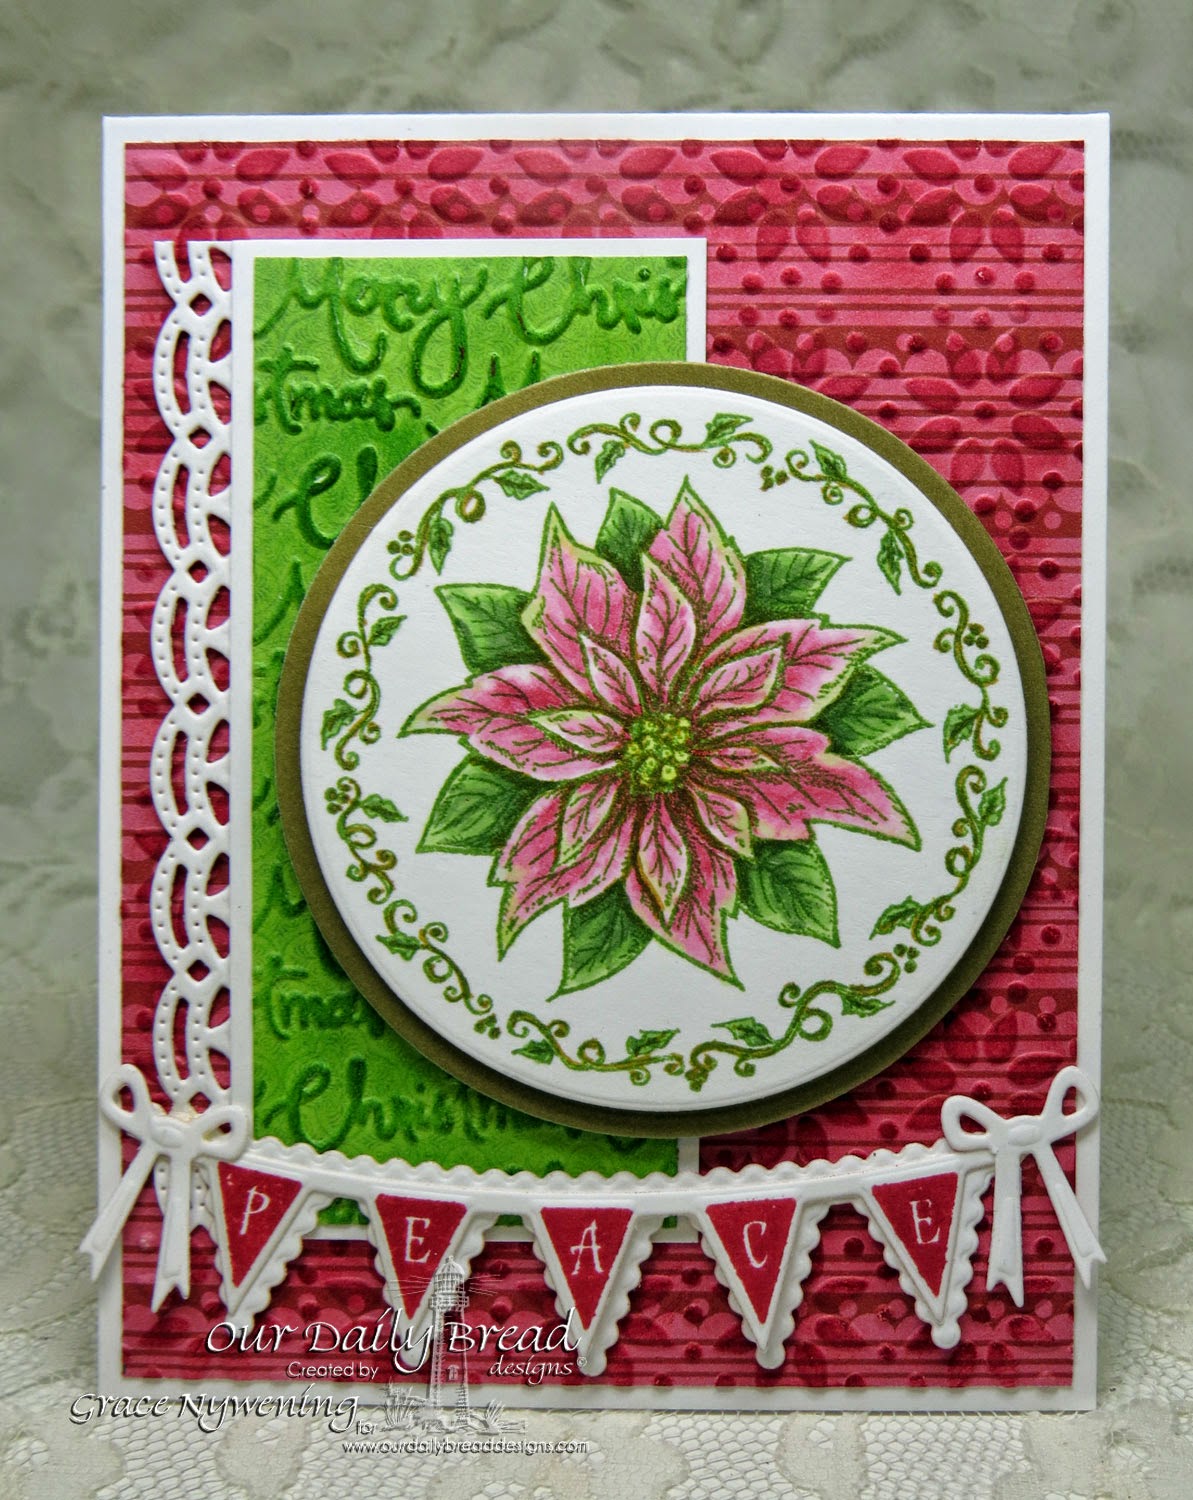 ODBD stamps: Poinsettia Ornament, Christmas Pennant Row, designed by Grace Nywening